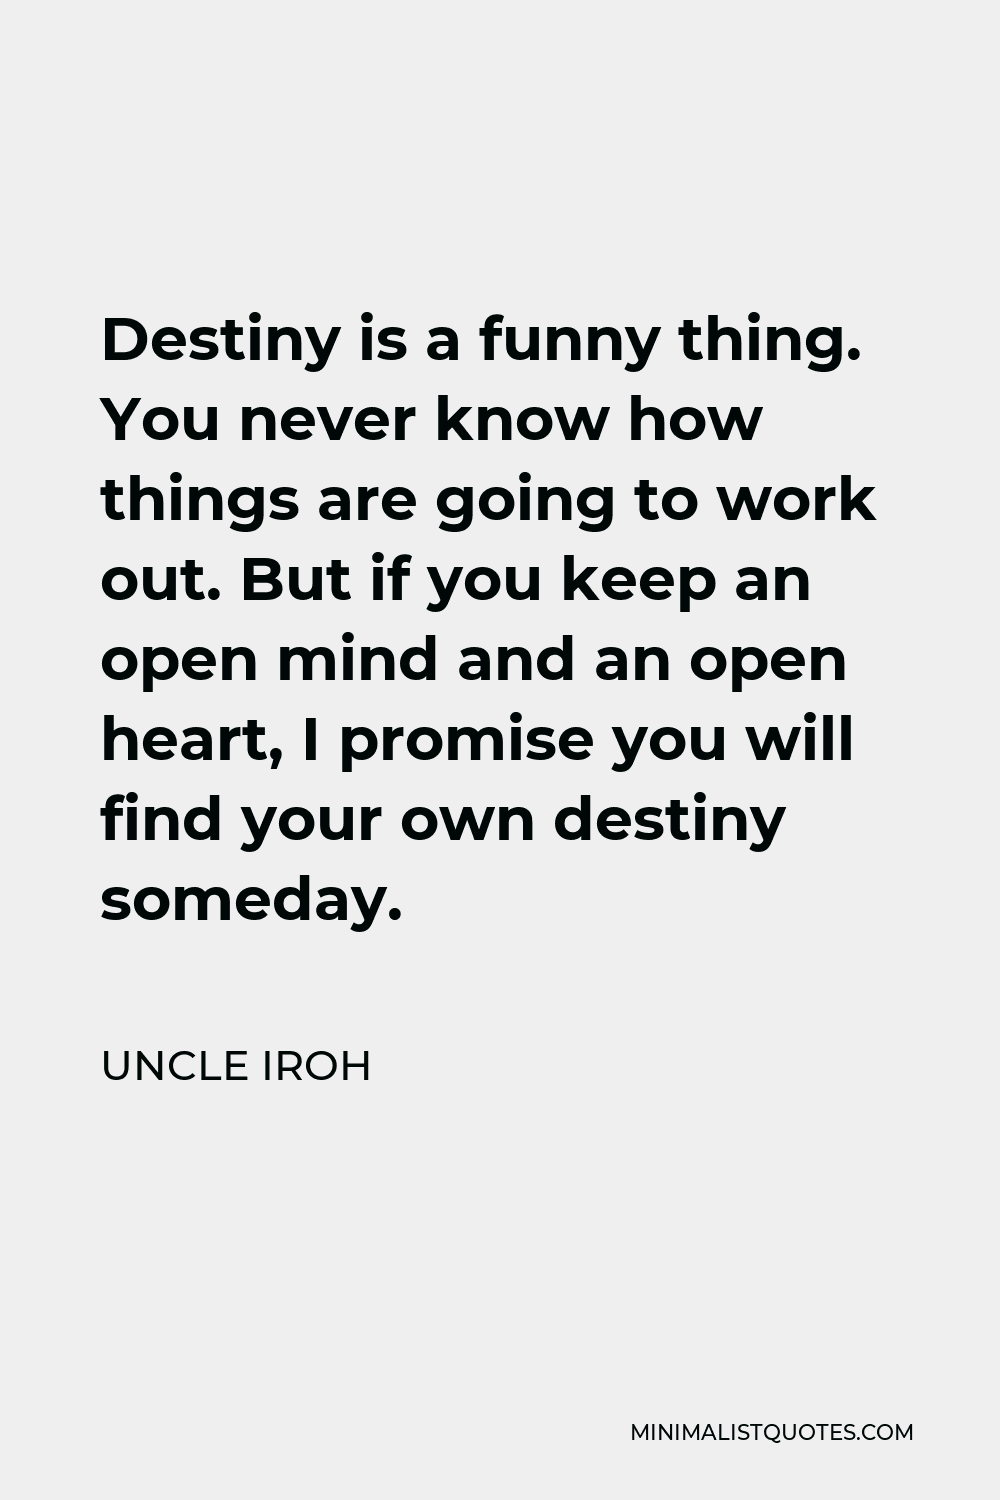 Uncle Iroh Quote: Destiny is a funny thing. You never know how things are  going to work out. But if you keep an open mind and an open heart, I  promise you